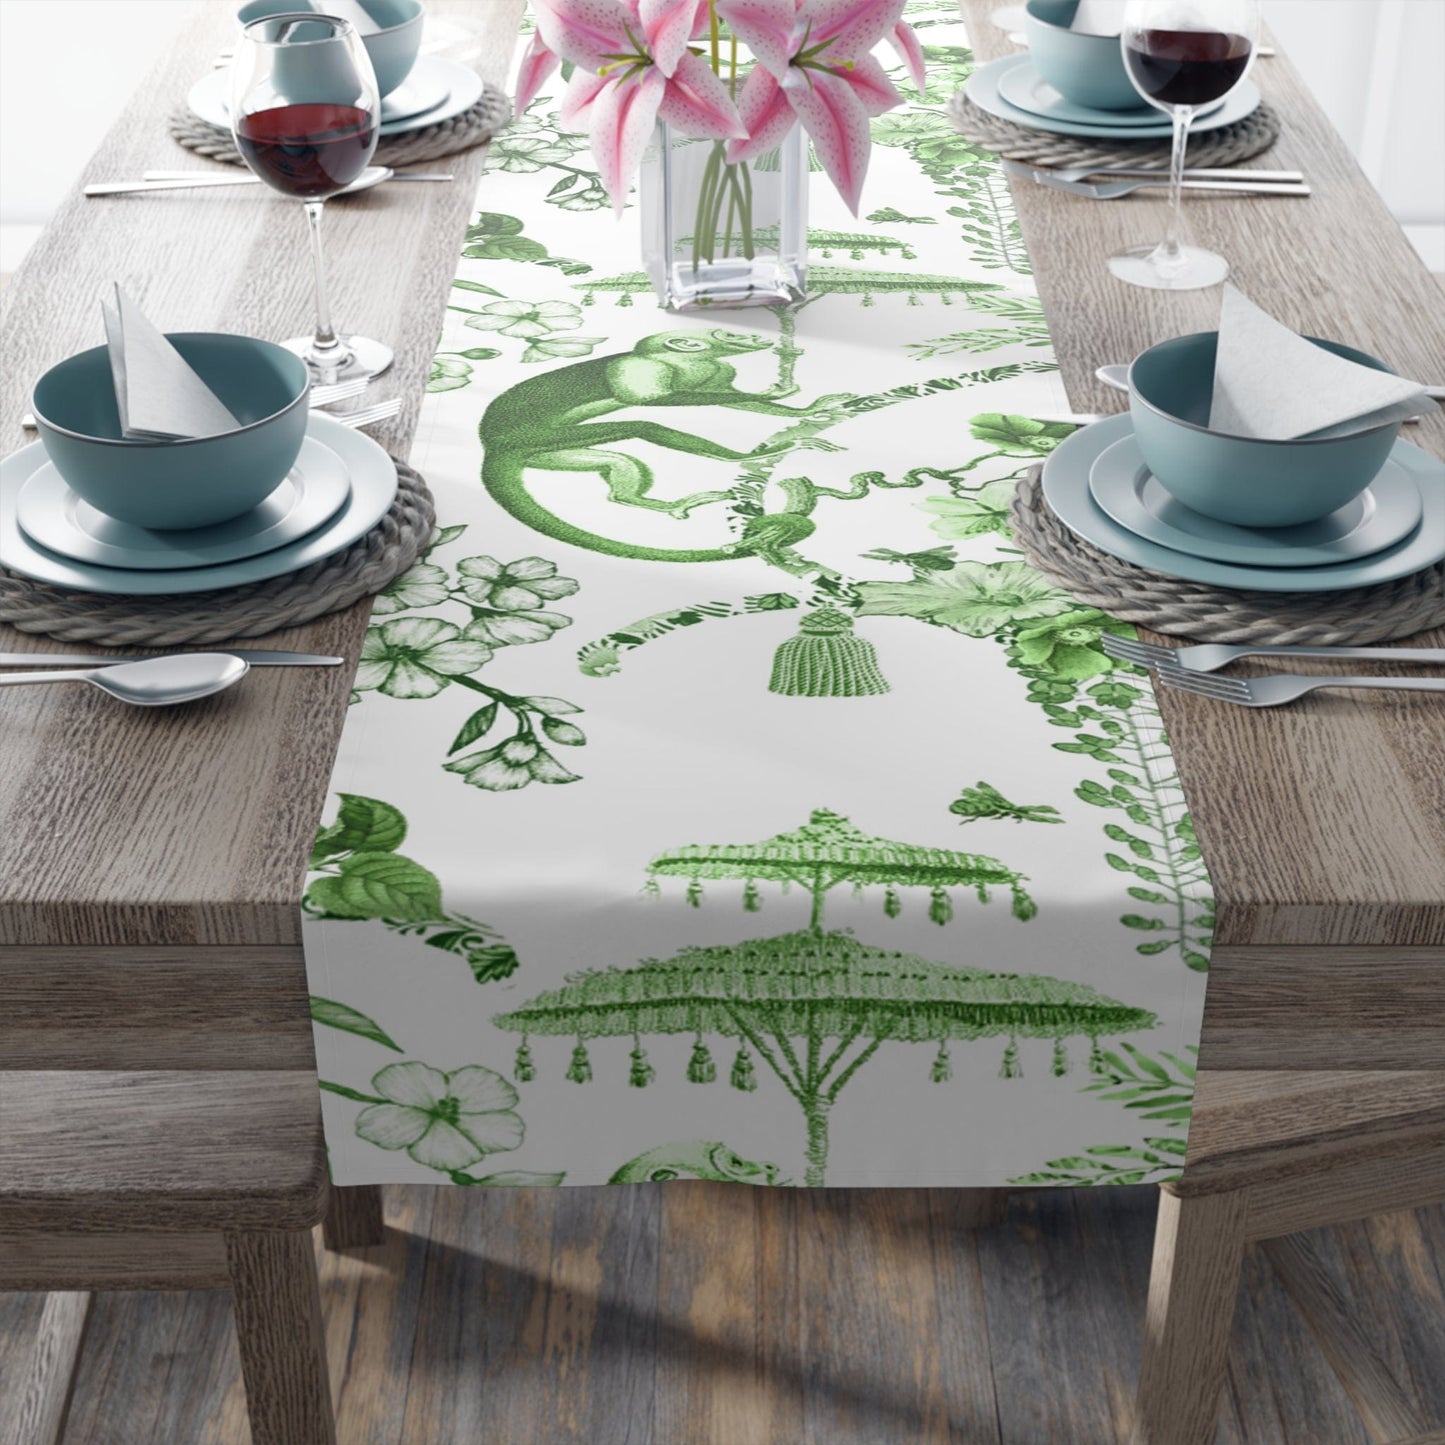 Printify Chinoiserie Botanical Toile Table Runner, Floral Green, White Chinoiserie Jungle, Country Farmhouse Grandmillenial Table Decor Home Decor 16" × 72" / Polyester 30218532707023893747